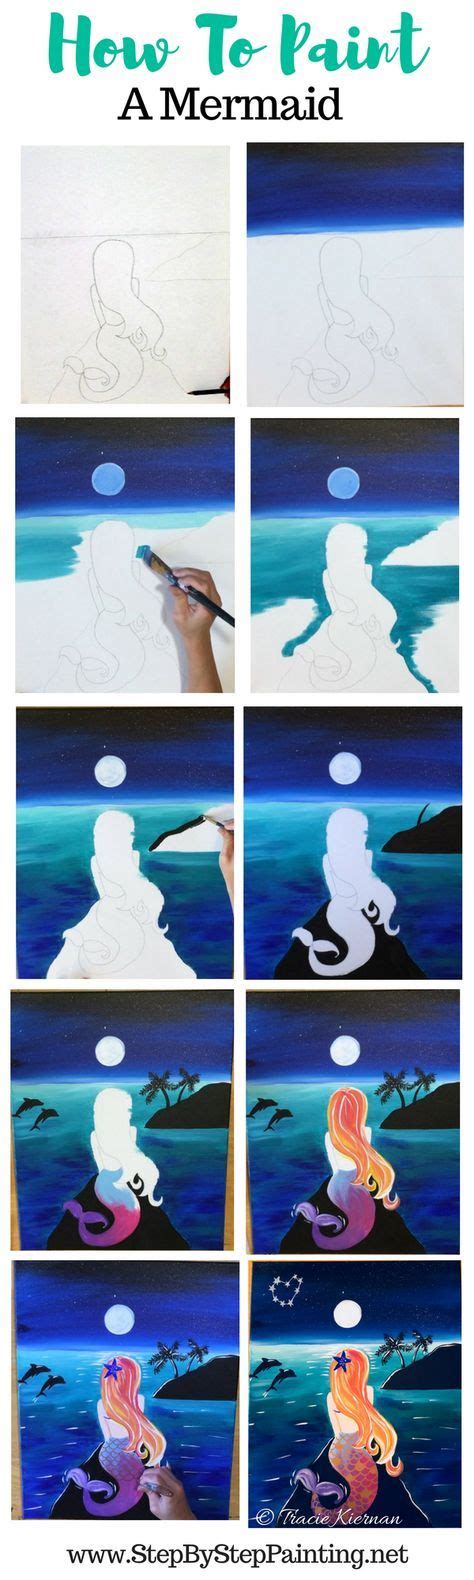 How To Paint A Mermaid Step By Step Painting Tutorial Painting